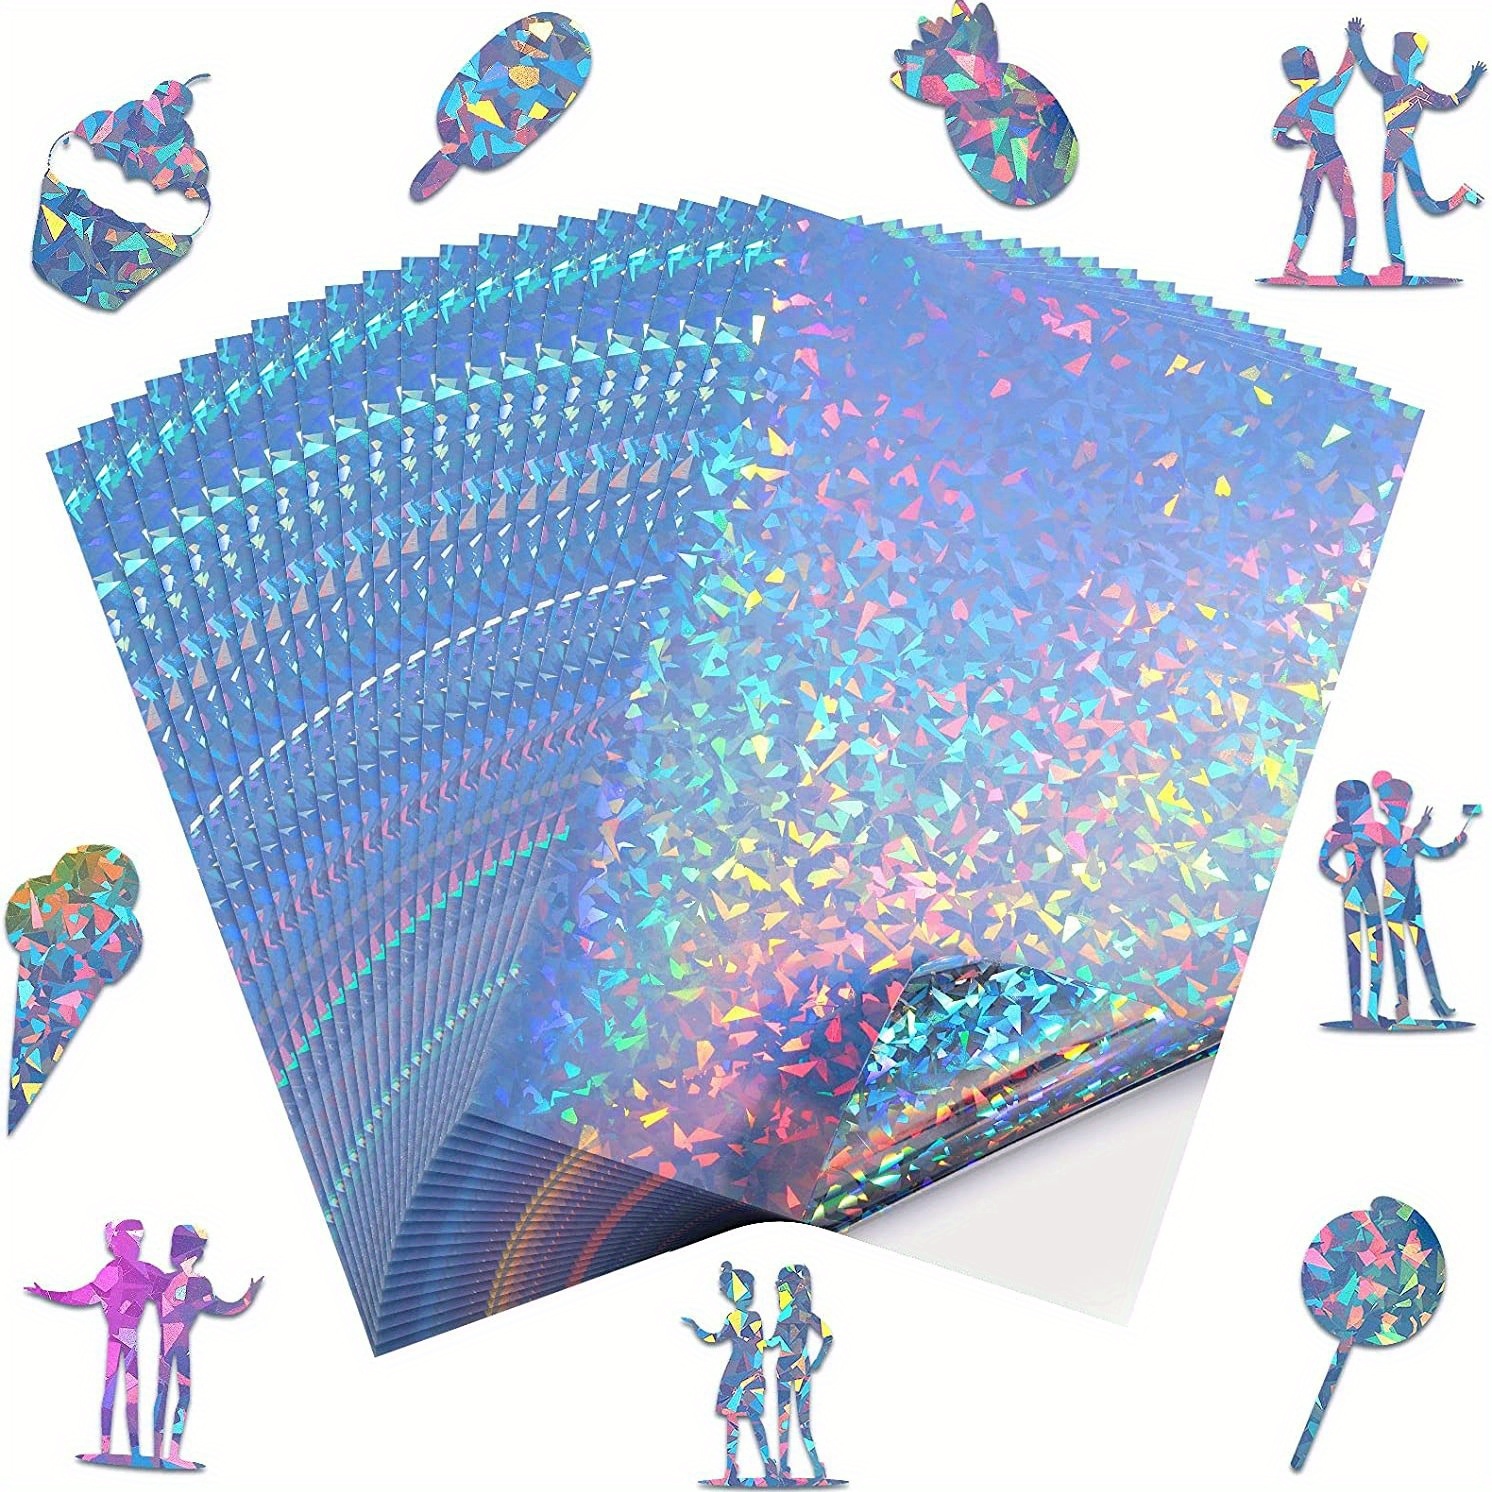 Sparkle Holographic Laminate, 12x12 Self-Adhesive Laminating Sheets Vinyl  for Cricut, Stickers, Trading Cards, Photos, Scrapbooking, Journals